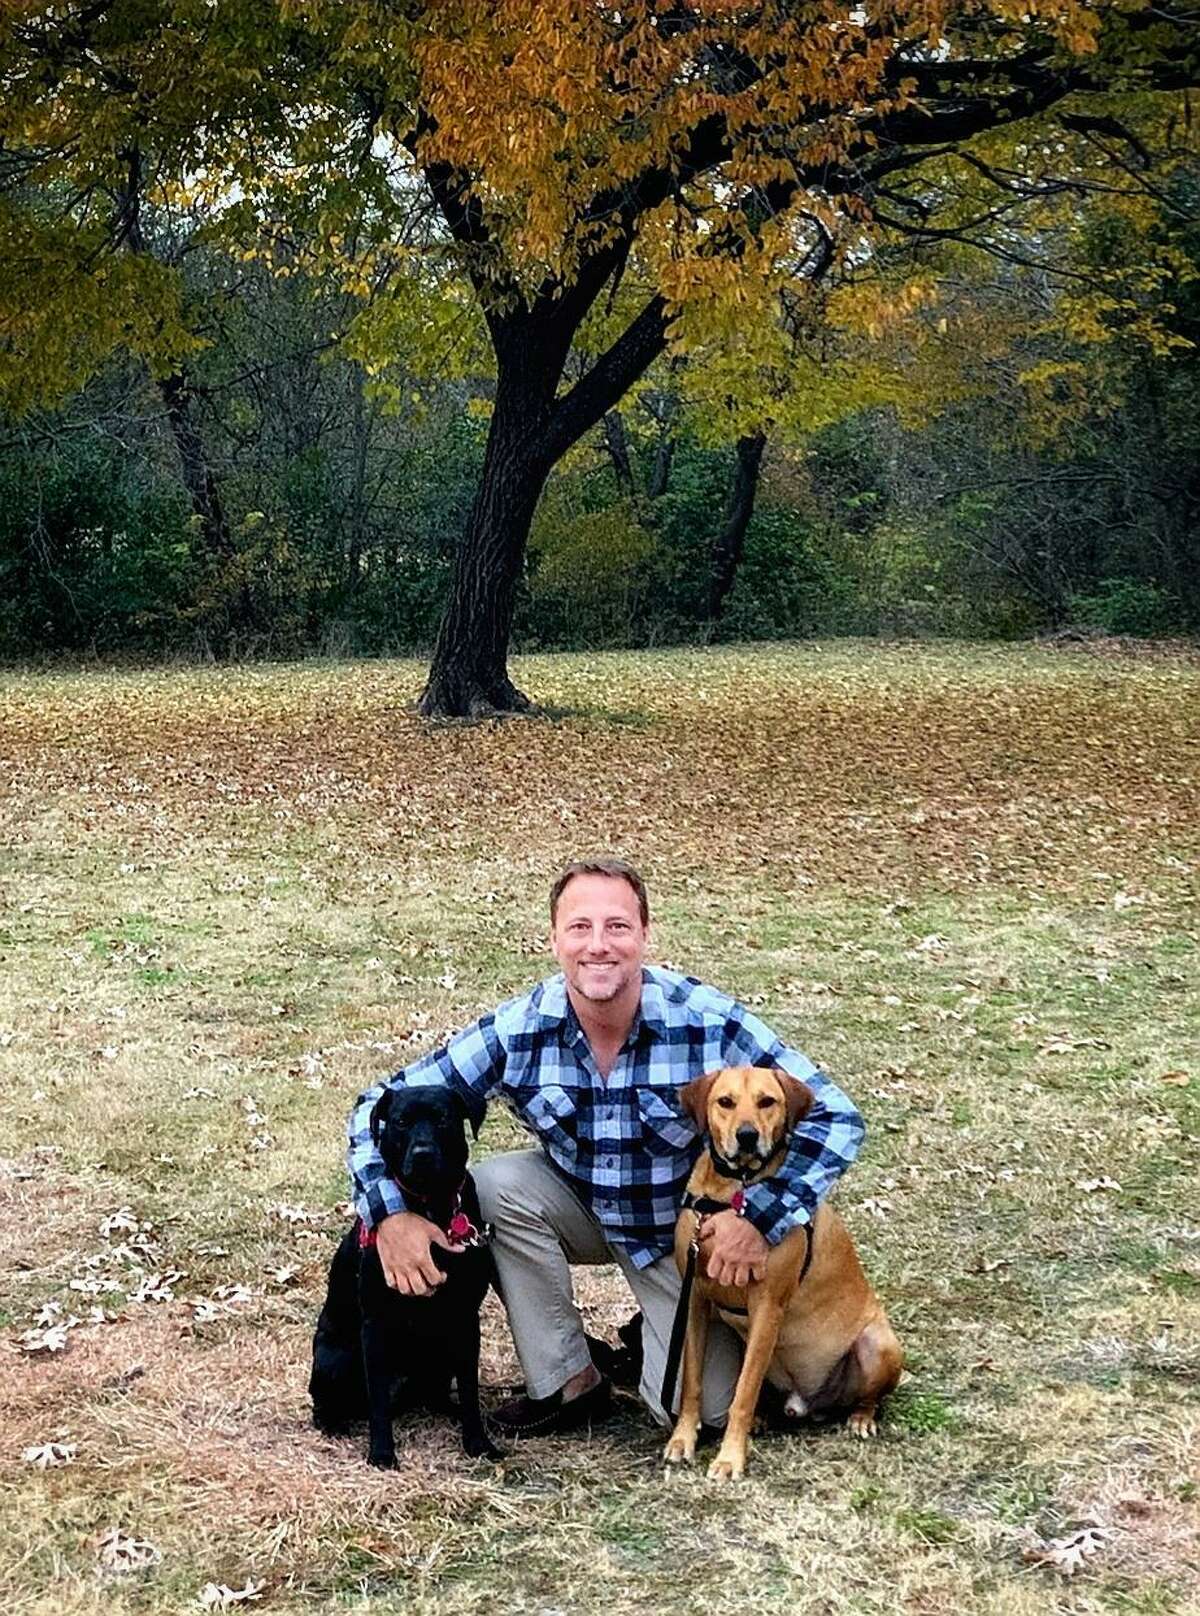 Chris Lierle poses with his dogs while waiting for the lab result of a novel coronavirus test. He felt sick after a road trip from Houston, Texas, to San Francisco, California that he made from late Februart to early March 2020.